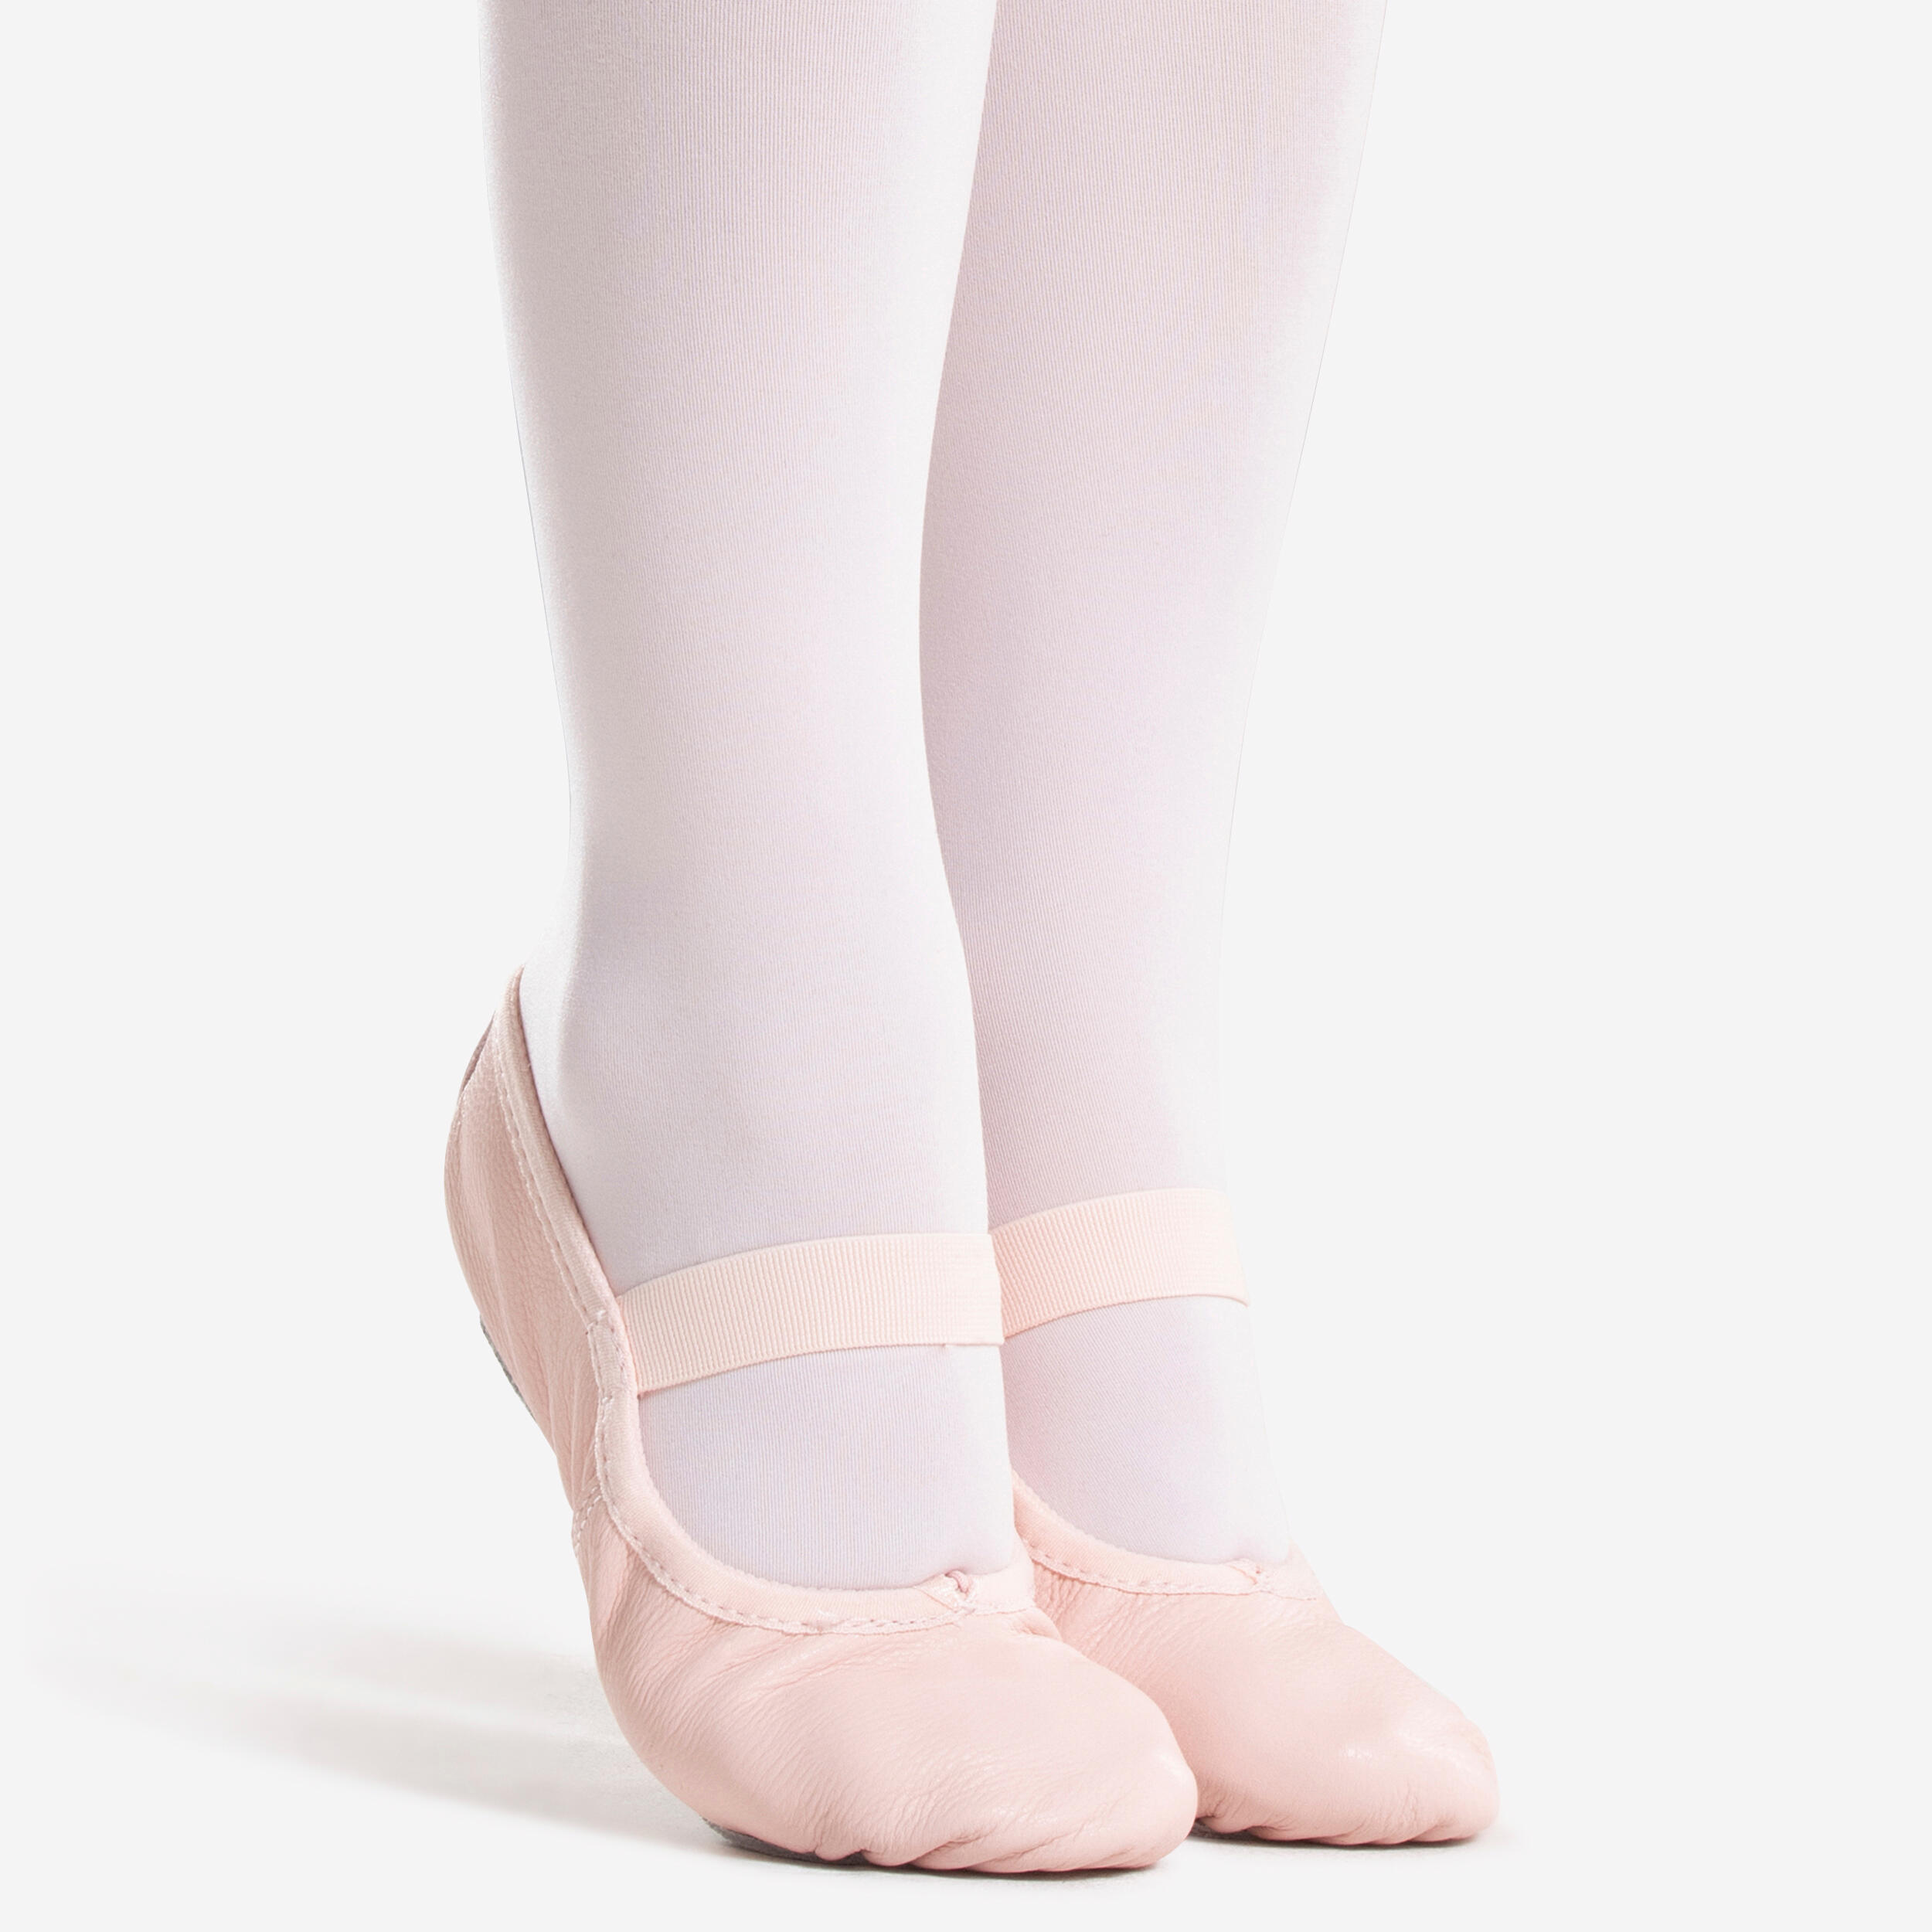 Girls' Footless Ballet Tights - Brown STAREVER